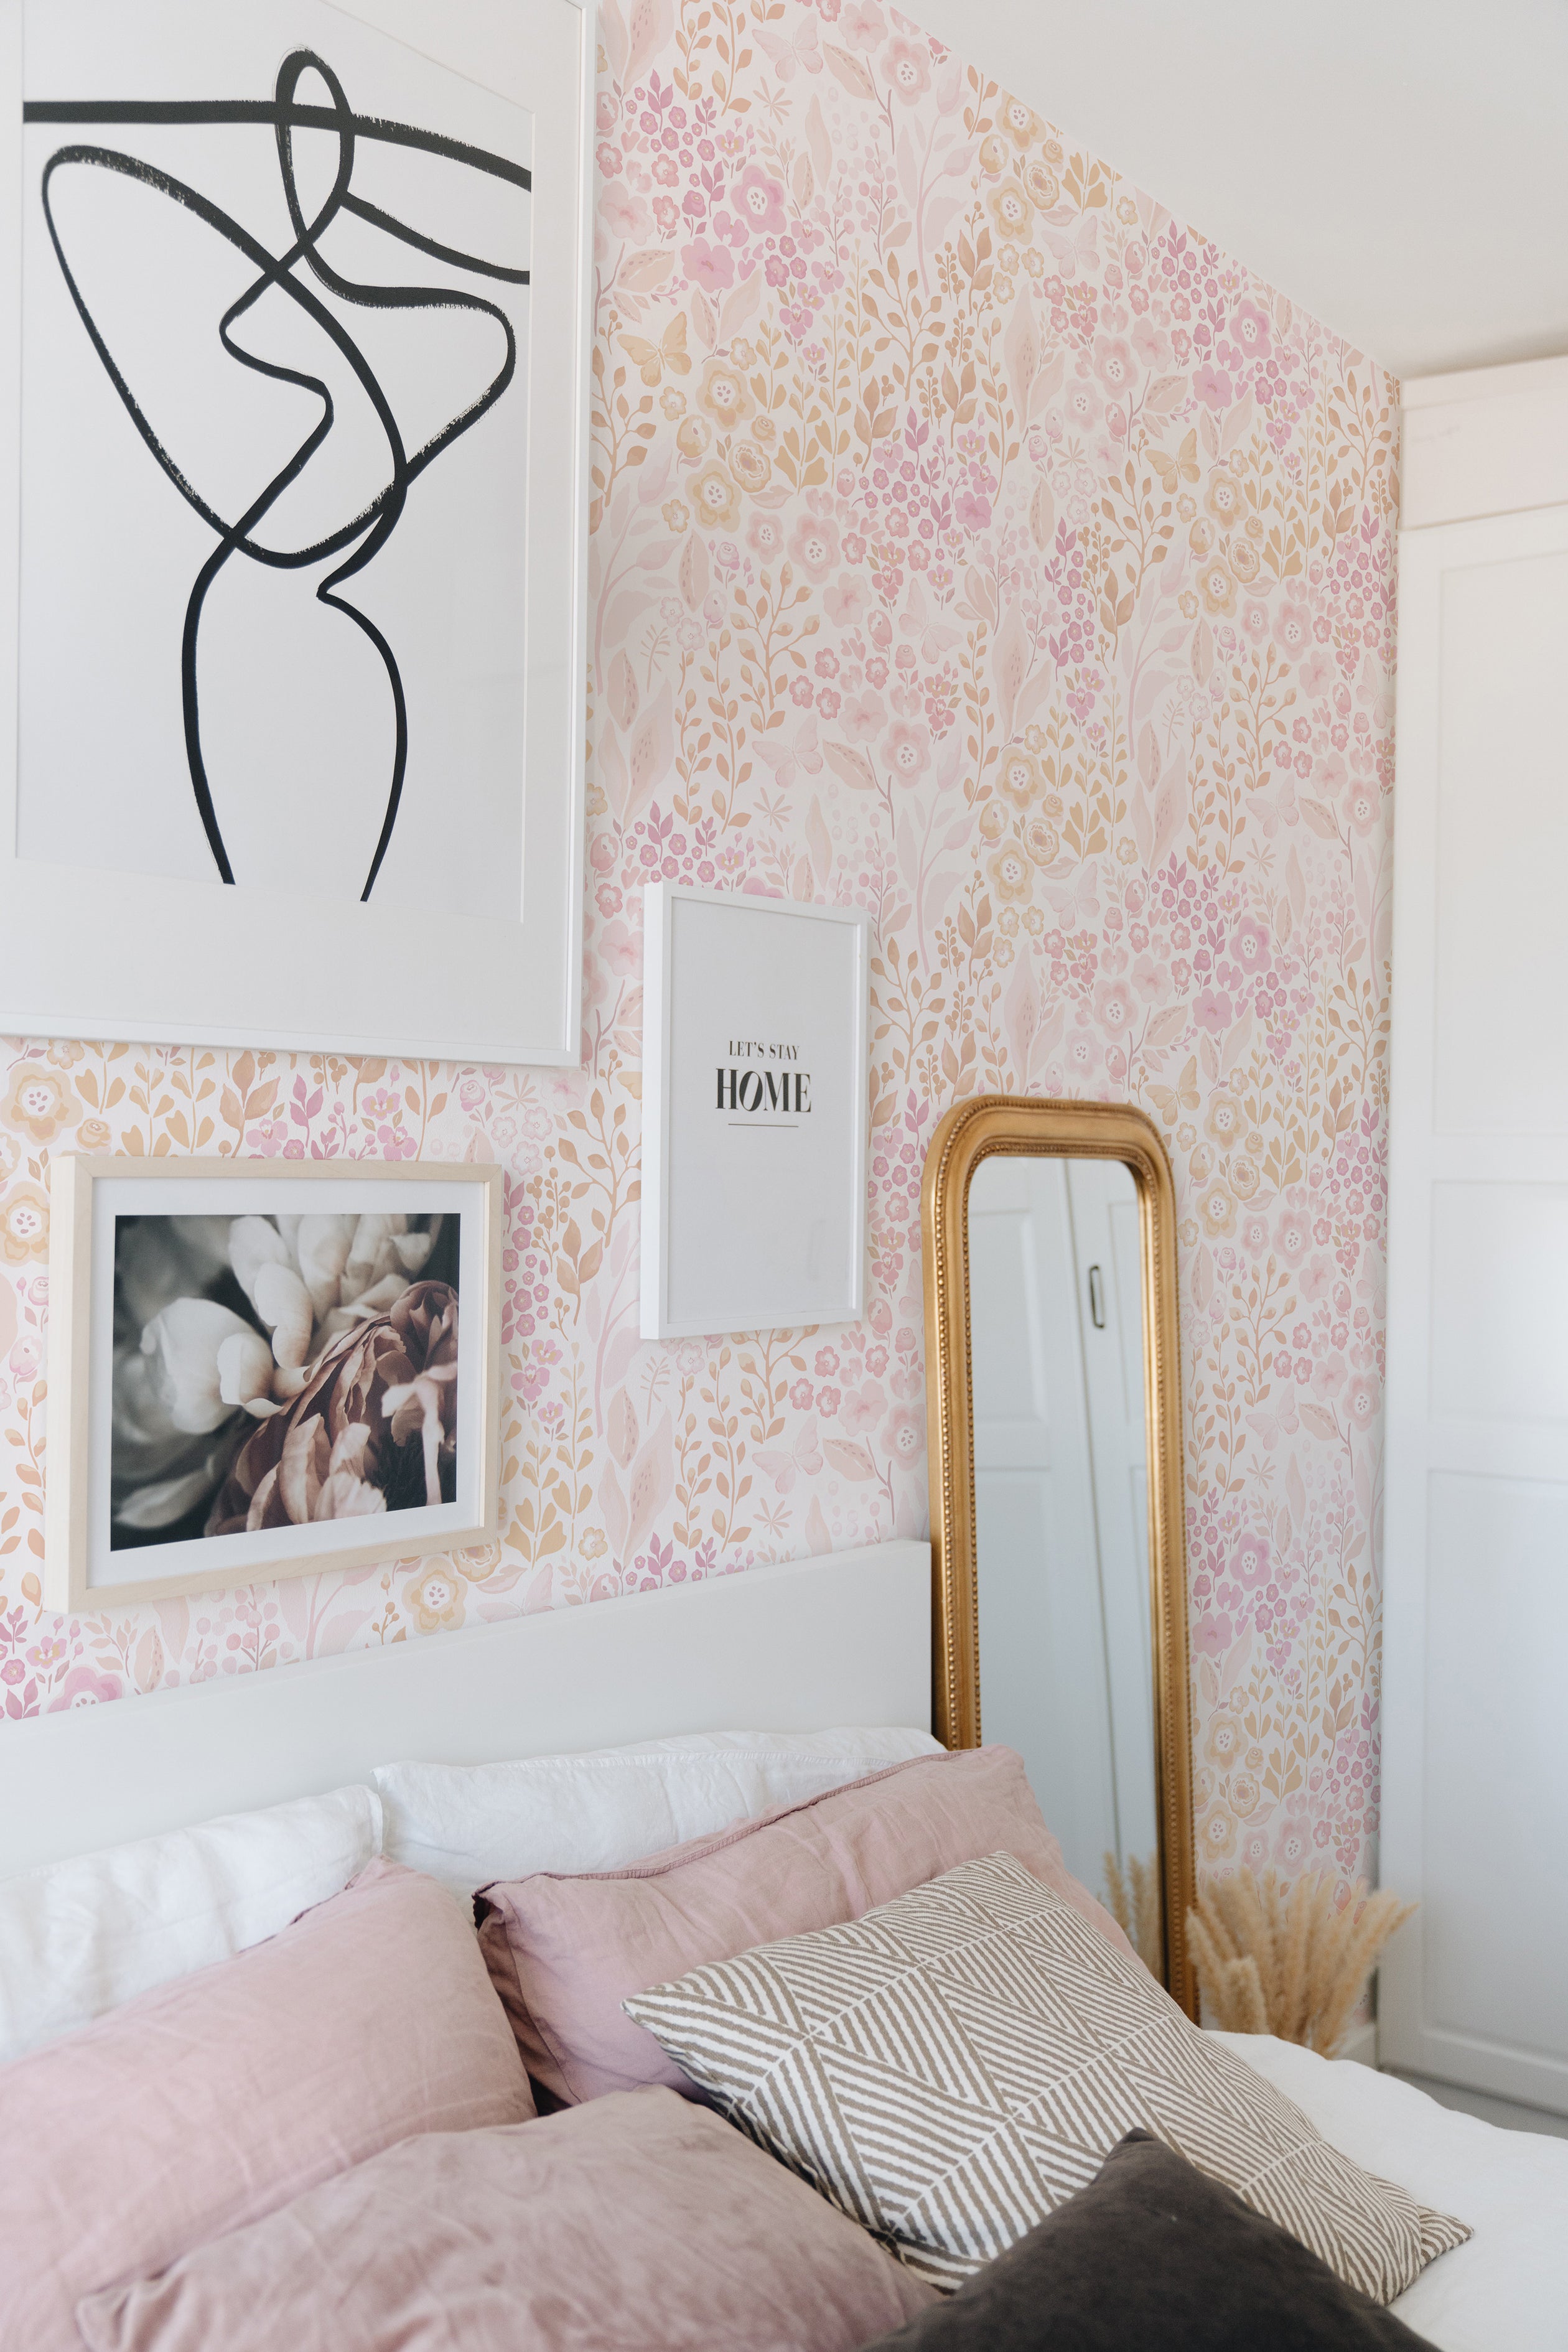 A cozy corner of a bedroom exudes charm with the Pretty Petals Wallpaper - 25". The wall, covered in soft pink and beige florals, provides a delicate backdrop to a classic bed with pink linens, framed art pieces, and an ornate gold mirror, creating a warm and stylish sleeping area.